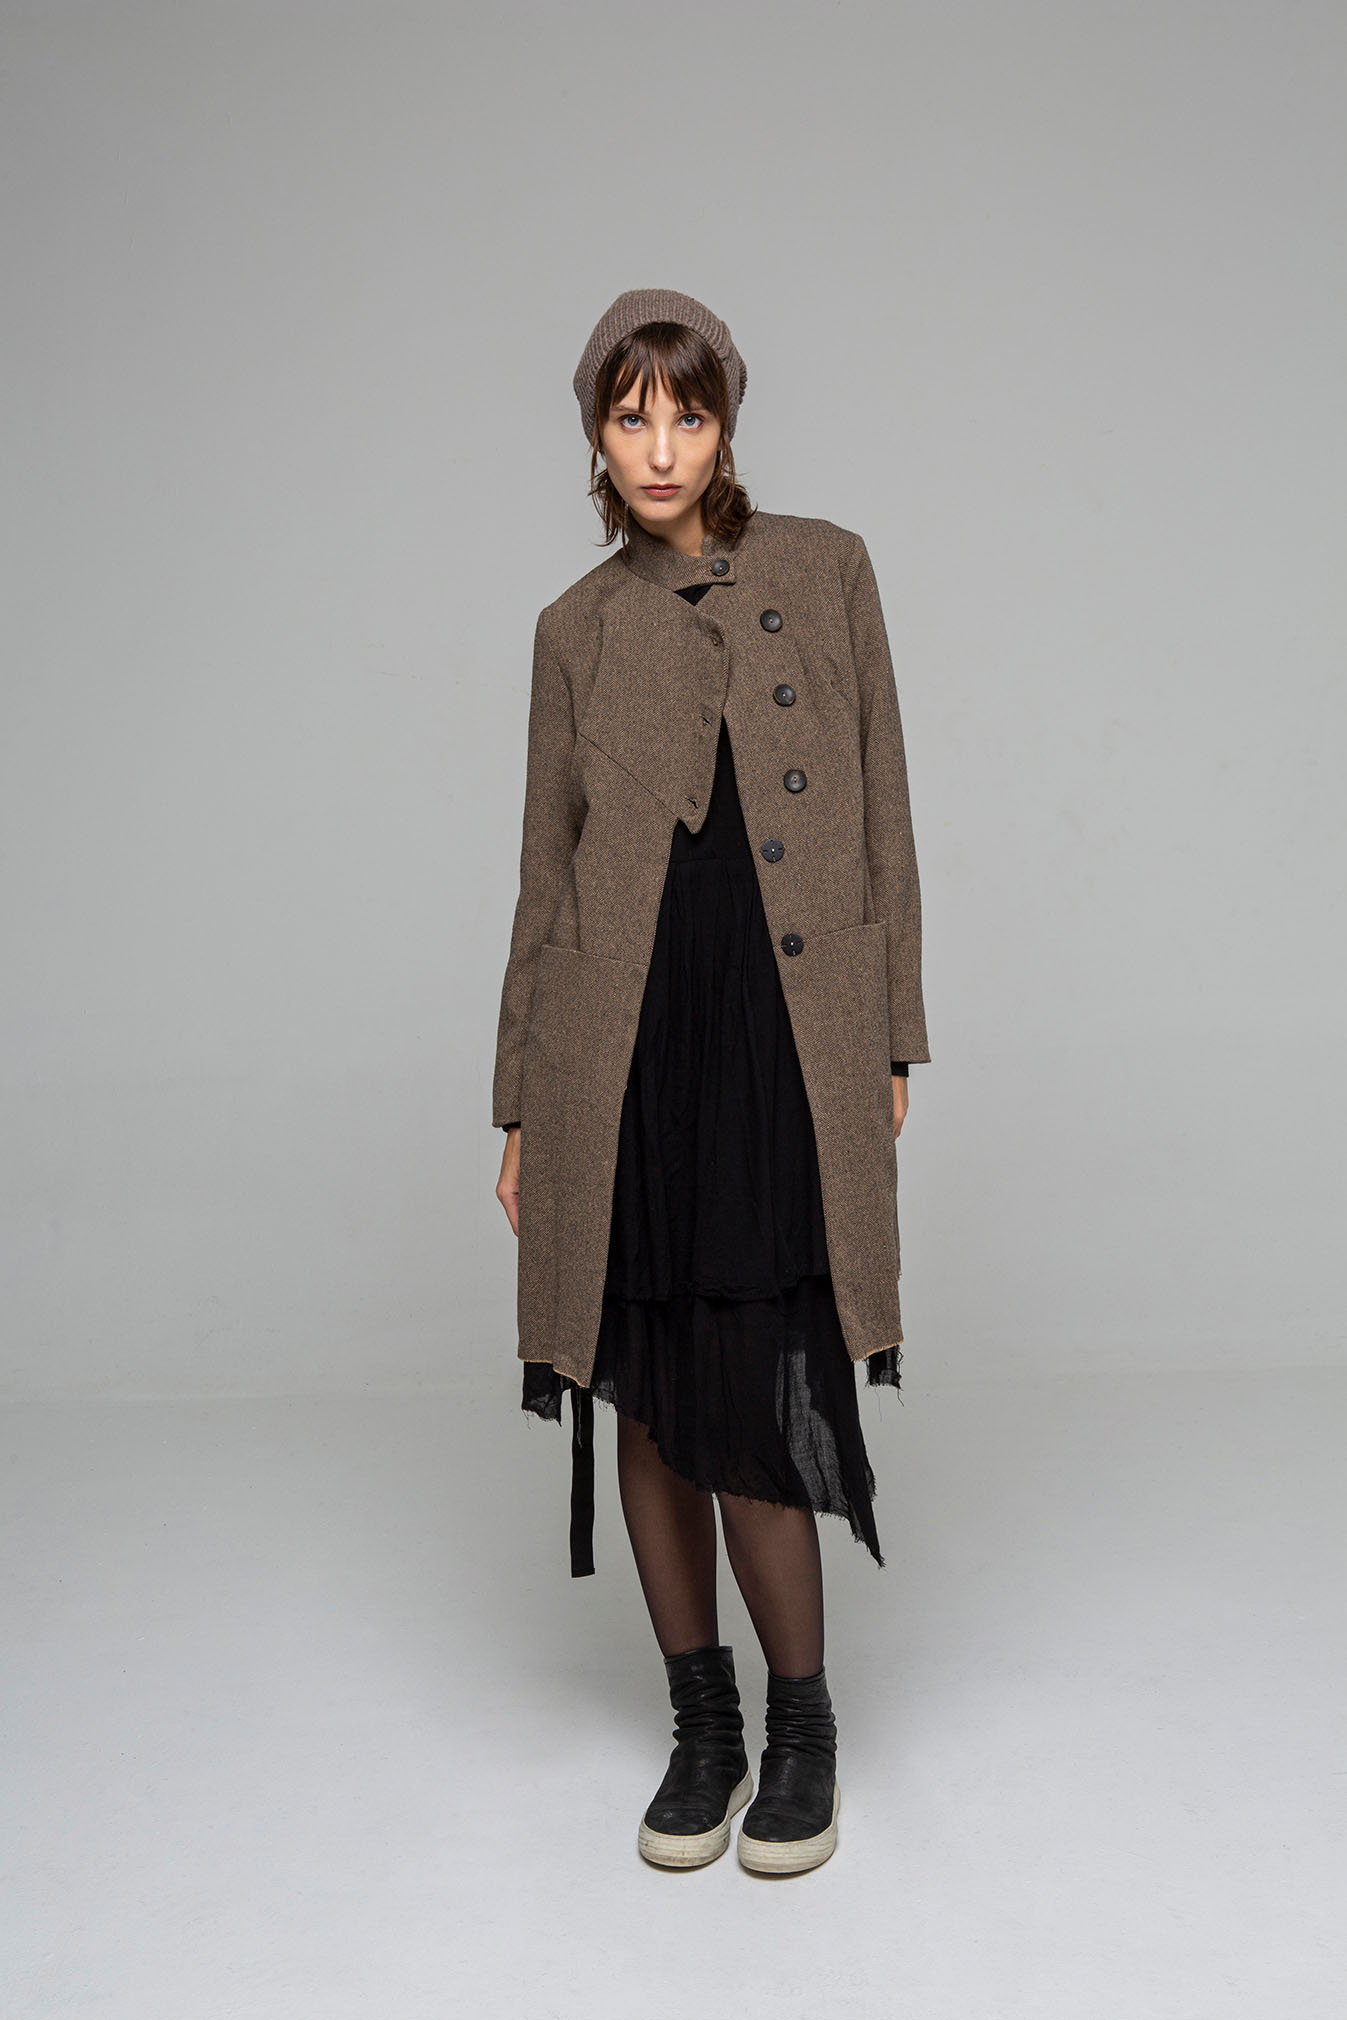 Women's Coat by Noble Athens